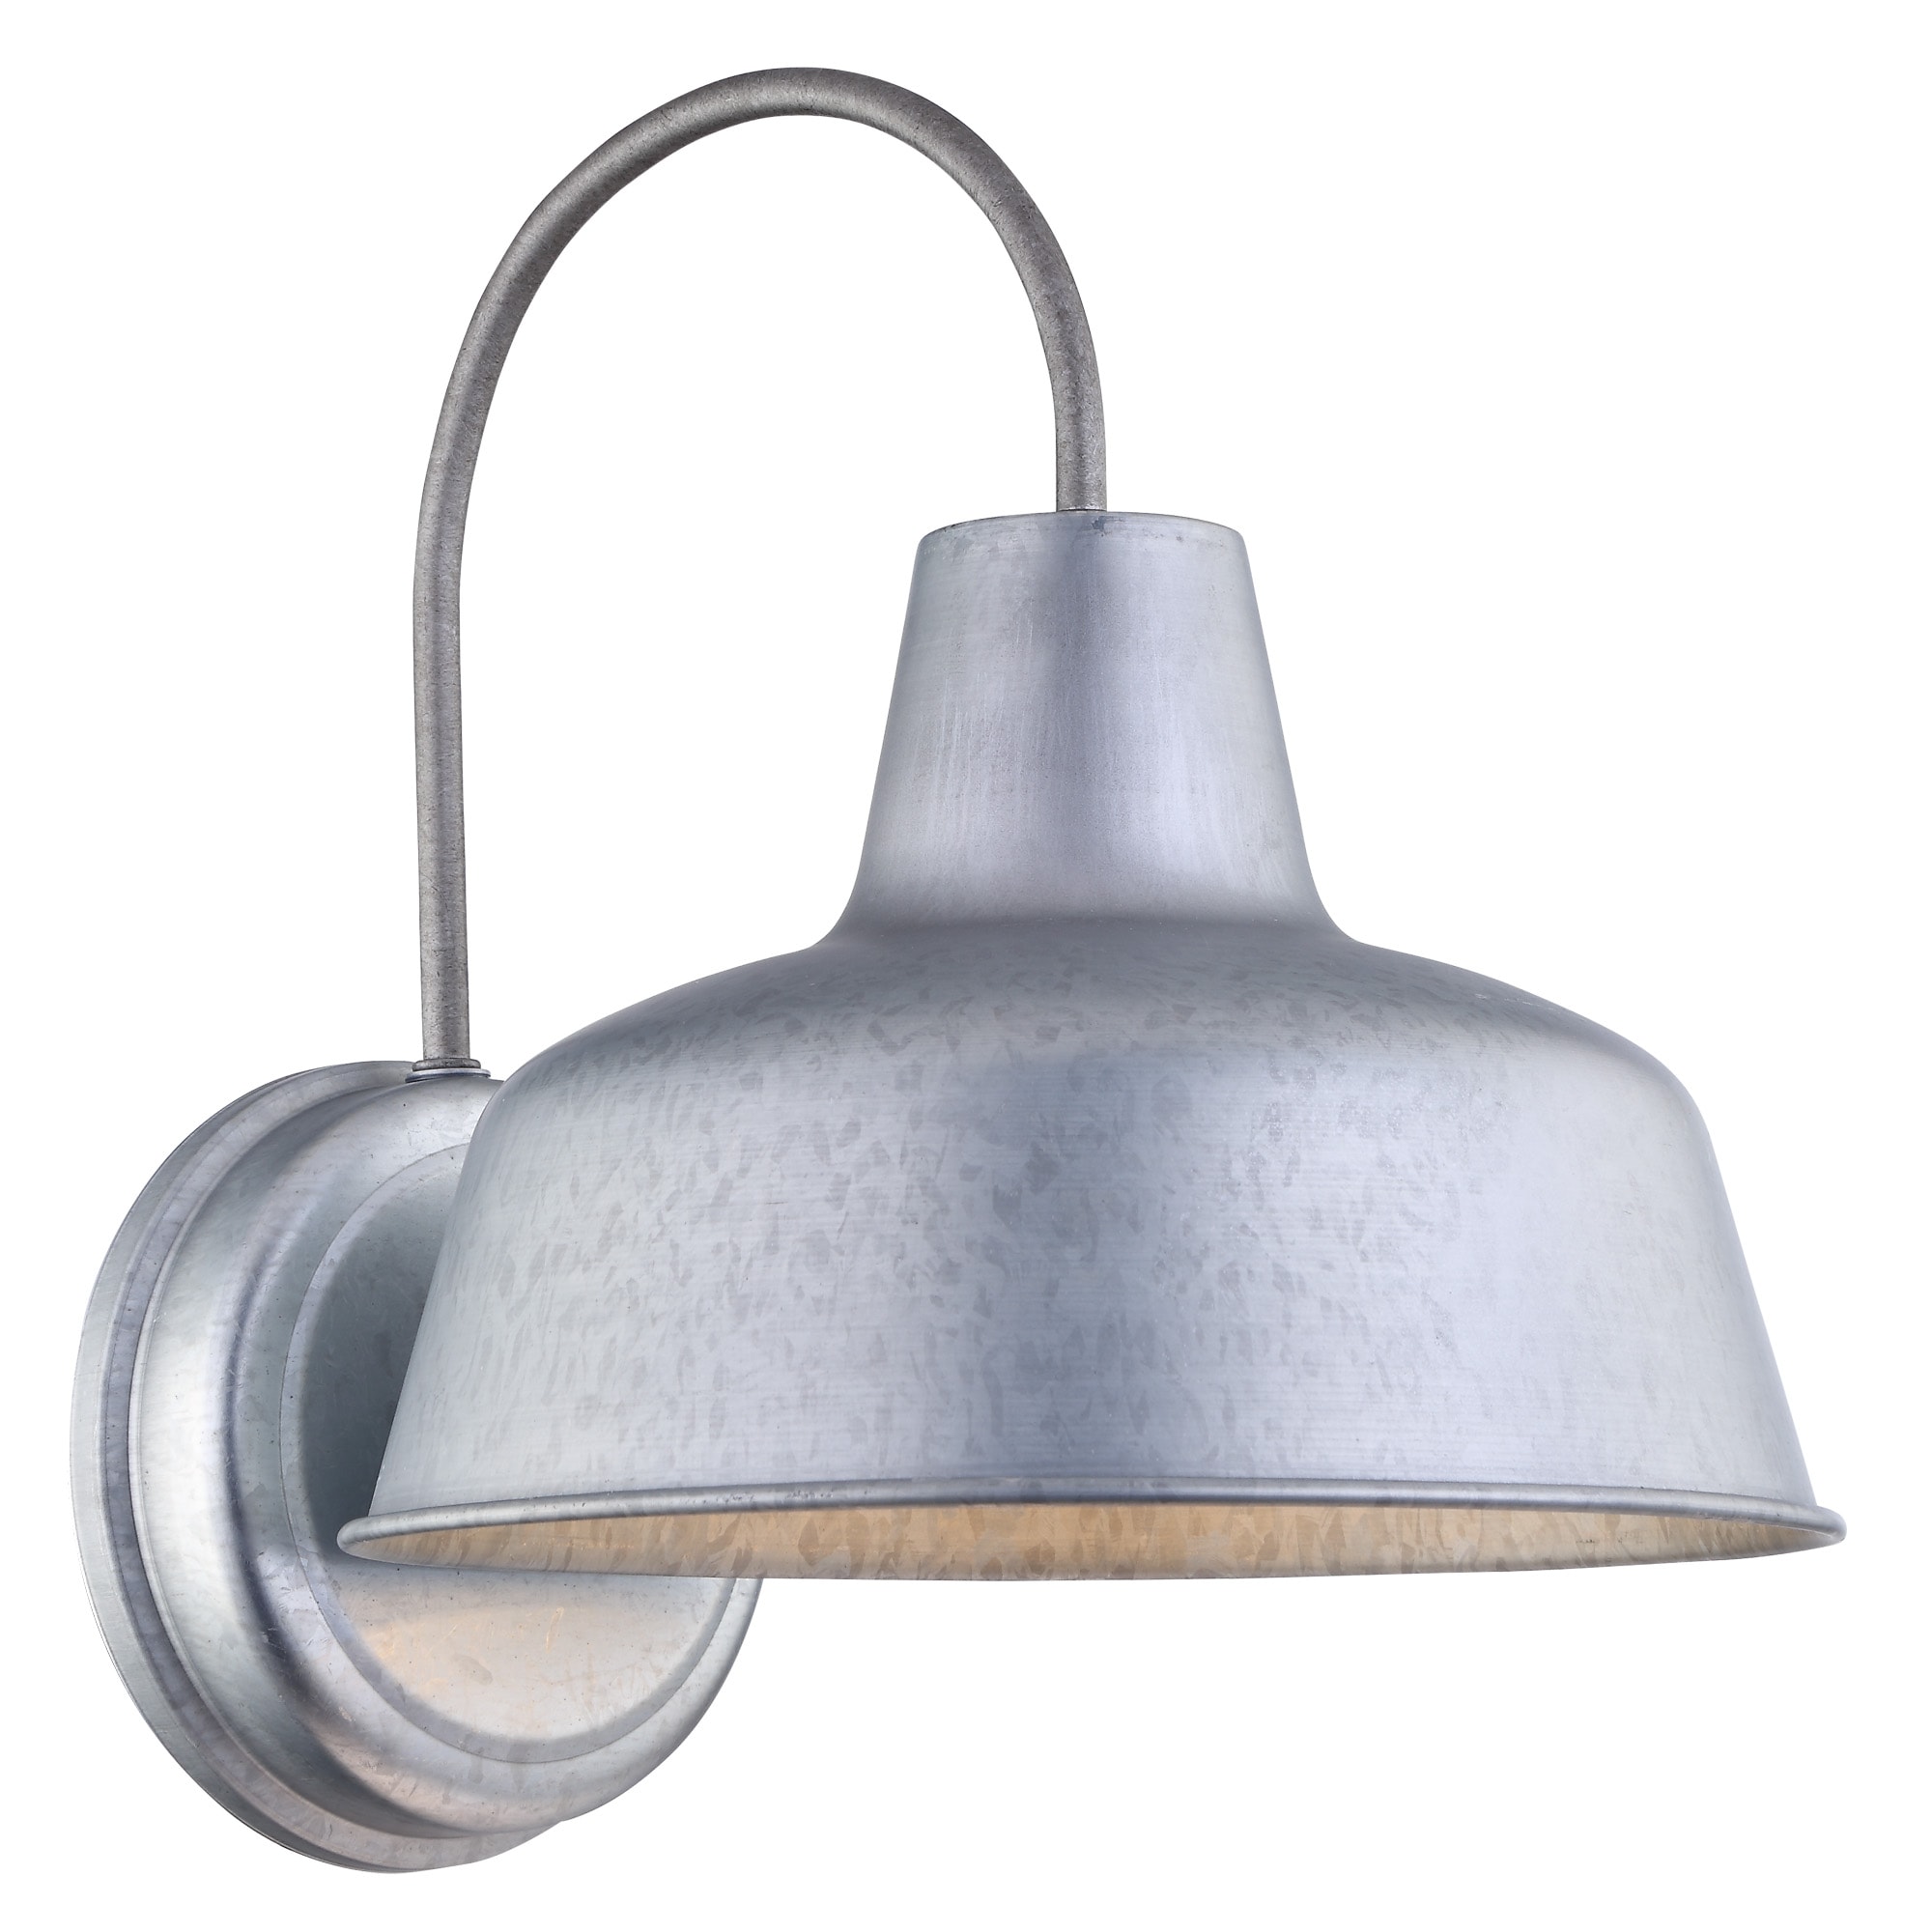 Details about   1-Light Galvanized Outdoor Barn Light Sconce Dimmable Fixture Lamp Metal Shade 